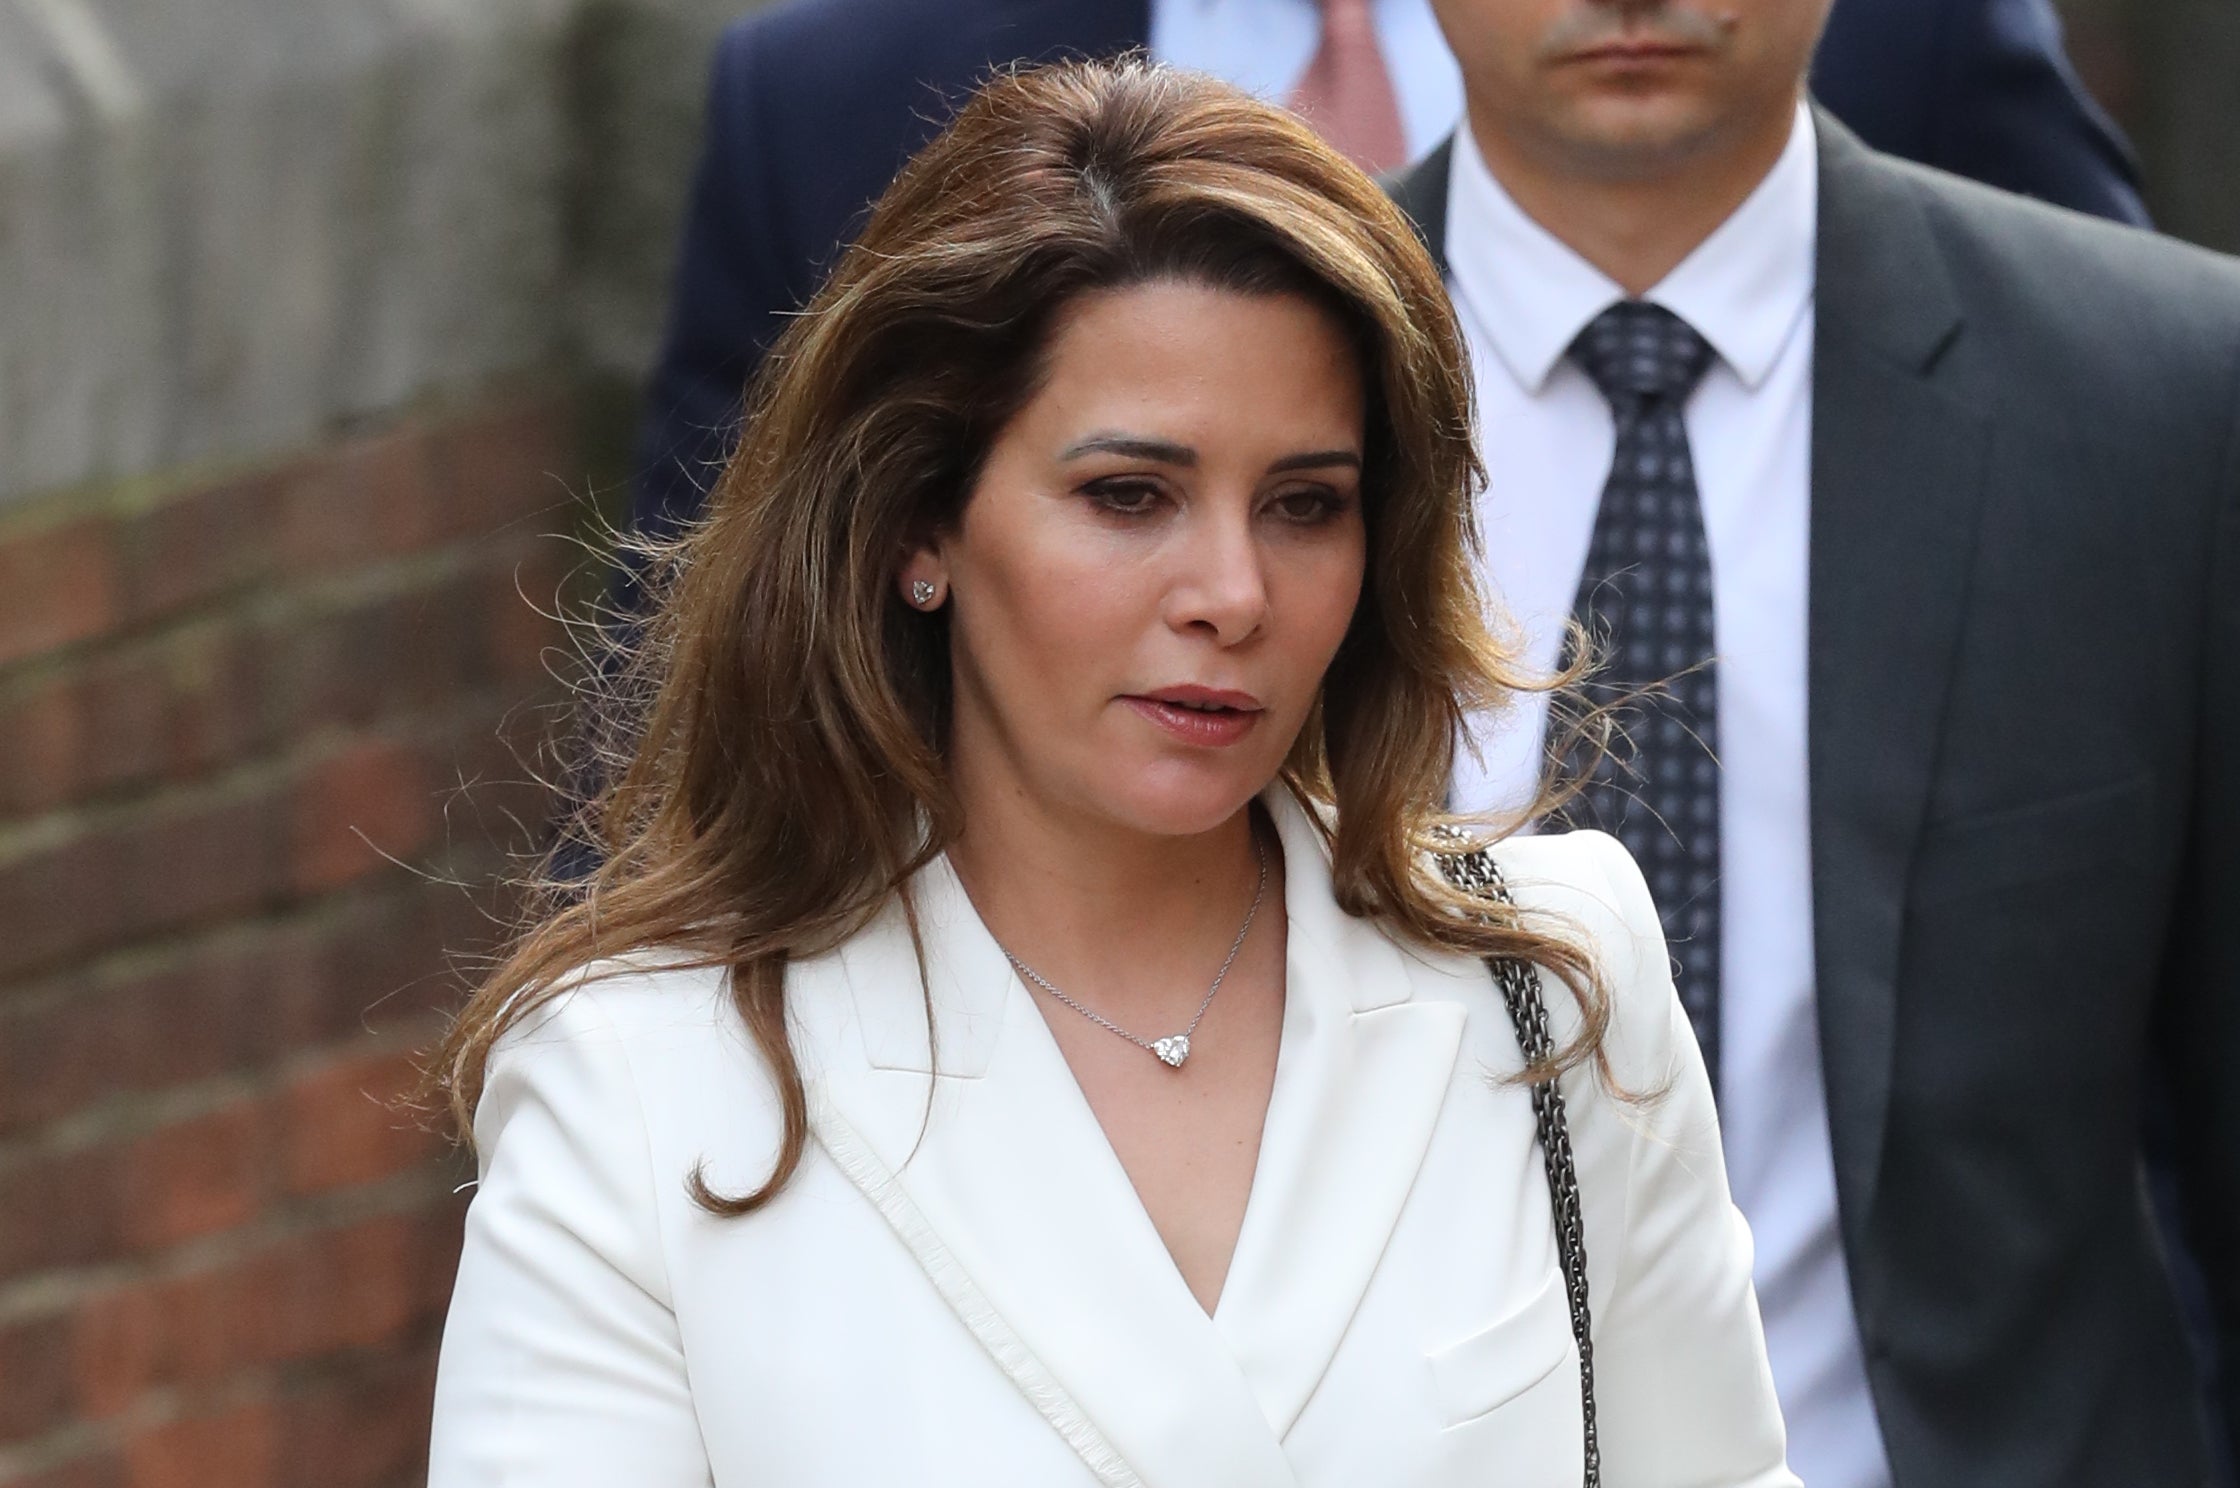 Dubai ruler Sheikh Mohammed abused former wife Princess Haya to exorbitant degree, High Court finds The Independent